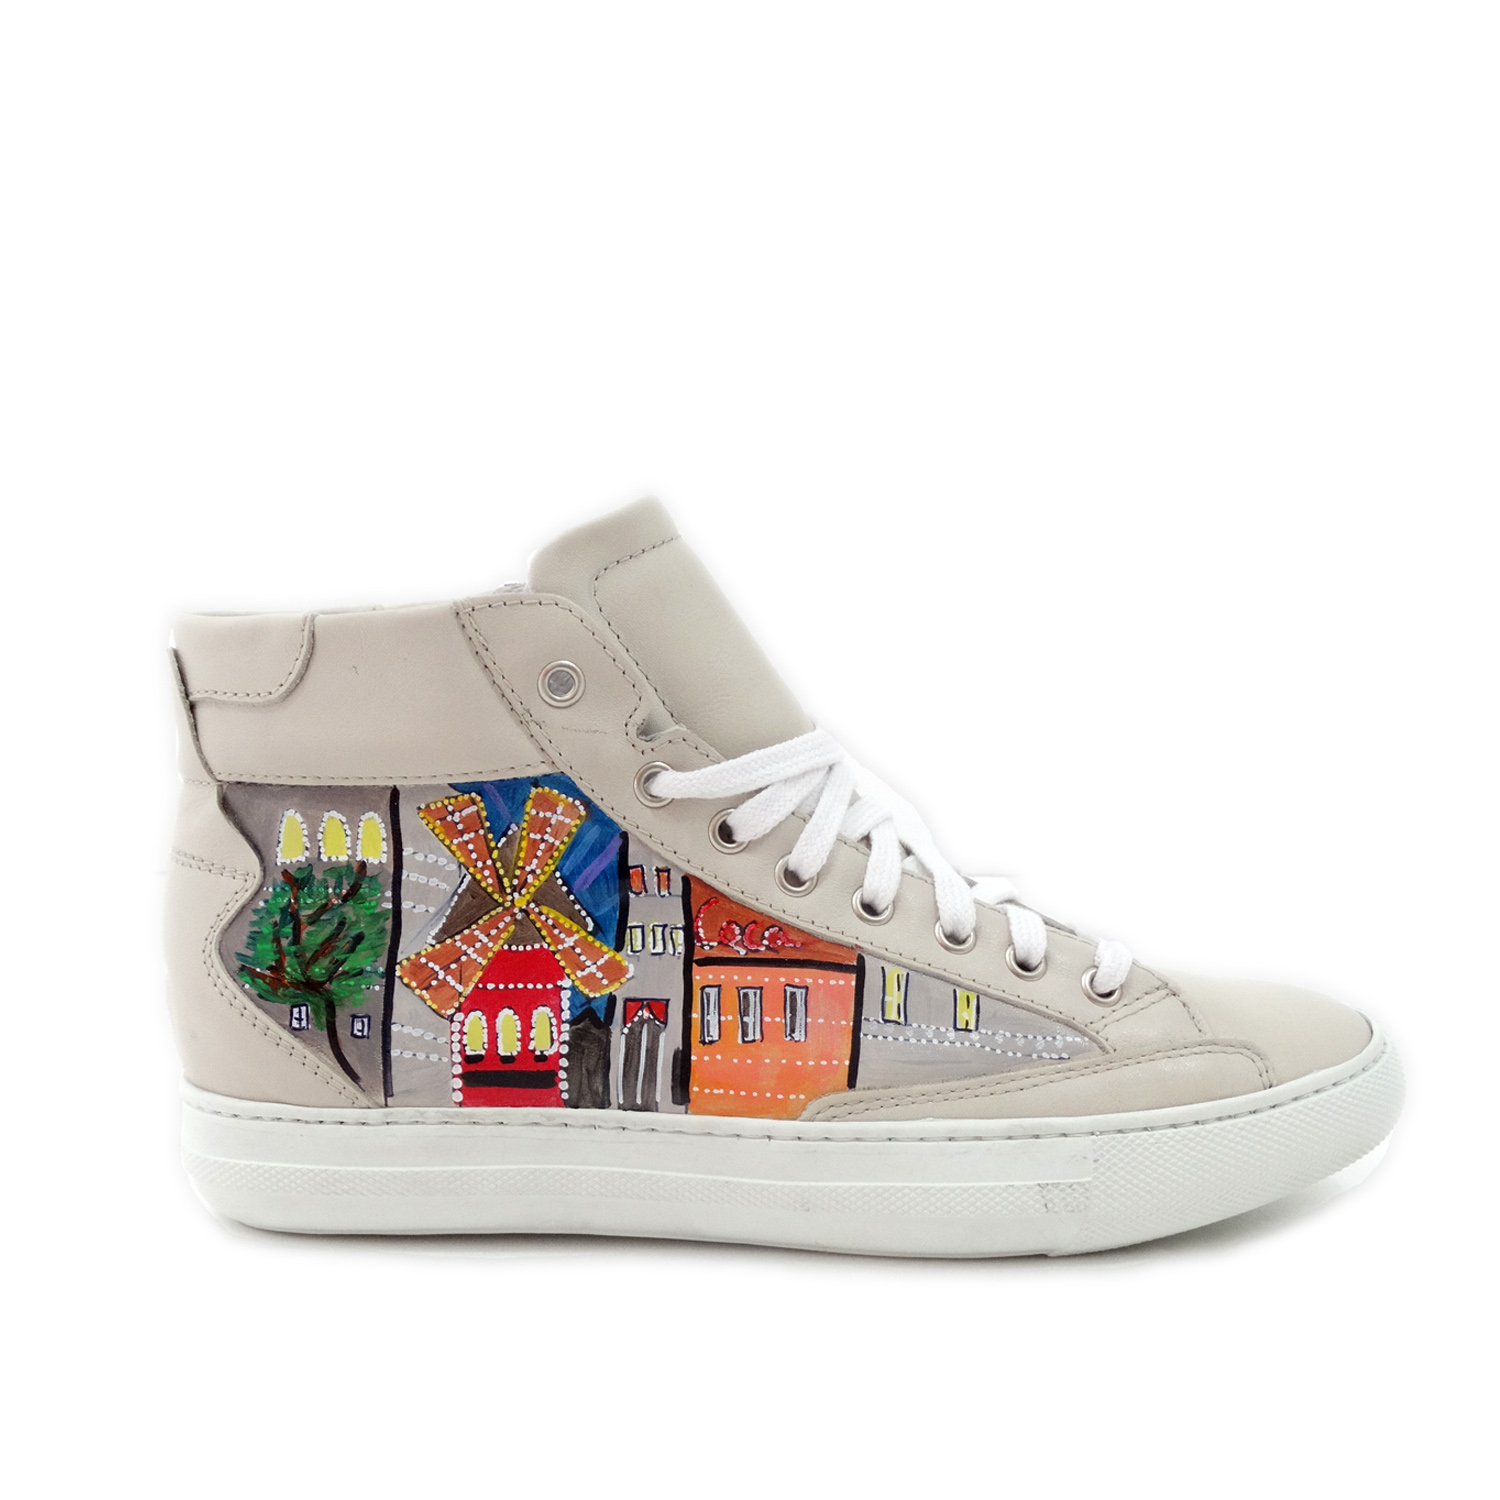 Sneakers dipinte a mano – Moulin Rouge